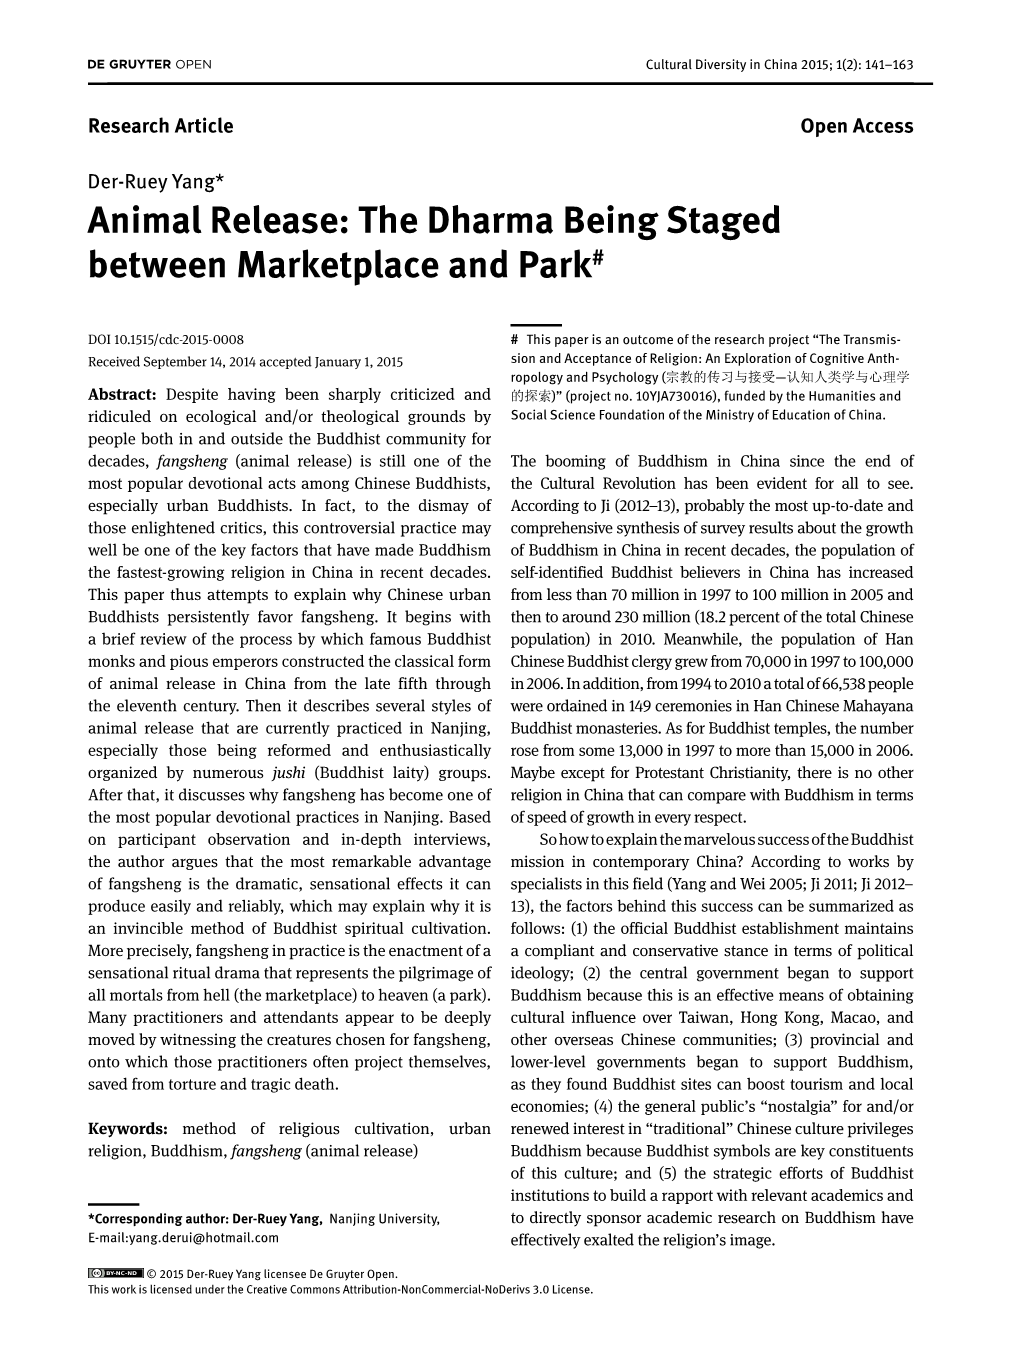 Animal Release: the Dharma Being Staged Between Marketplace and Park